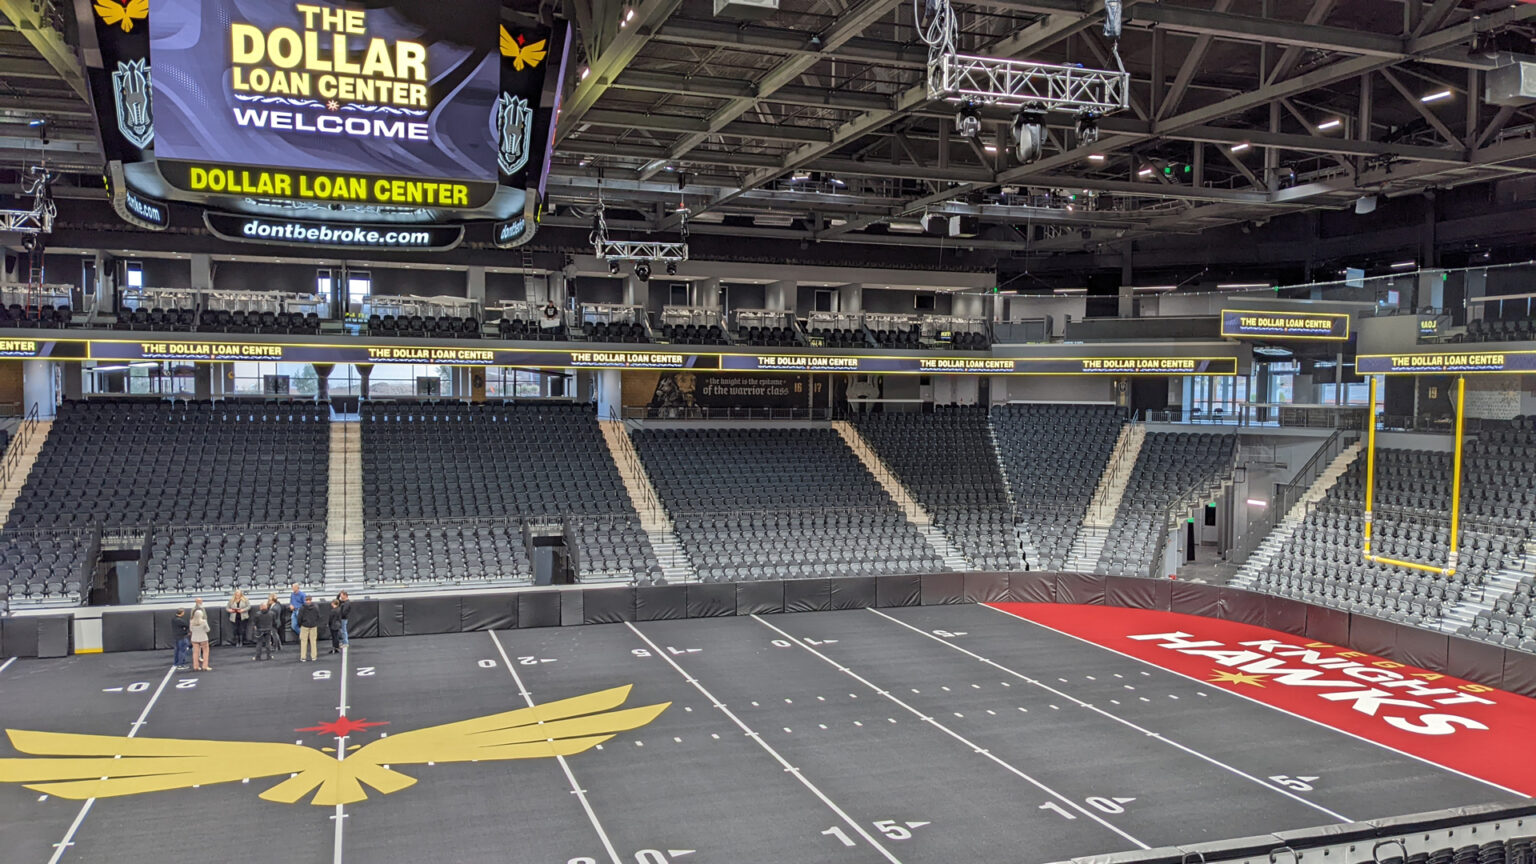 Vegas Knight Hawks to host SelectASeat event at the Dollar Loan